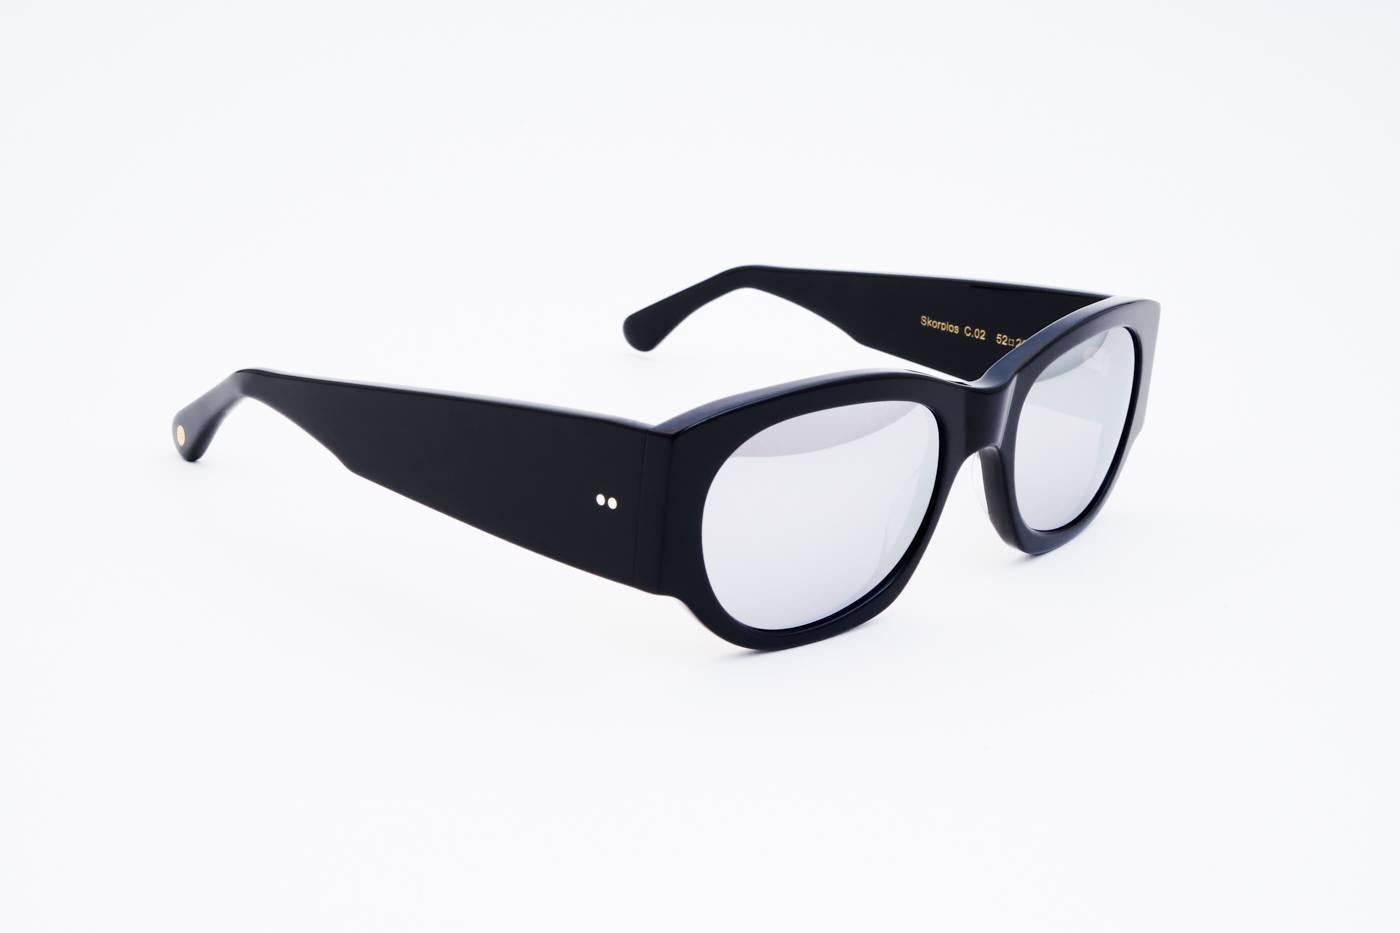 Berenford Skorpios eyewear is inspired by the shipping magnate Aristotle Onassis. Custom made for Onassis this particular spectacle was designed to reduce the sunlight entering the eye due to a vision problem near the end of his life. The mogul